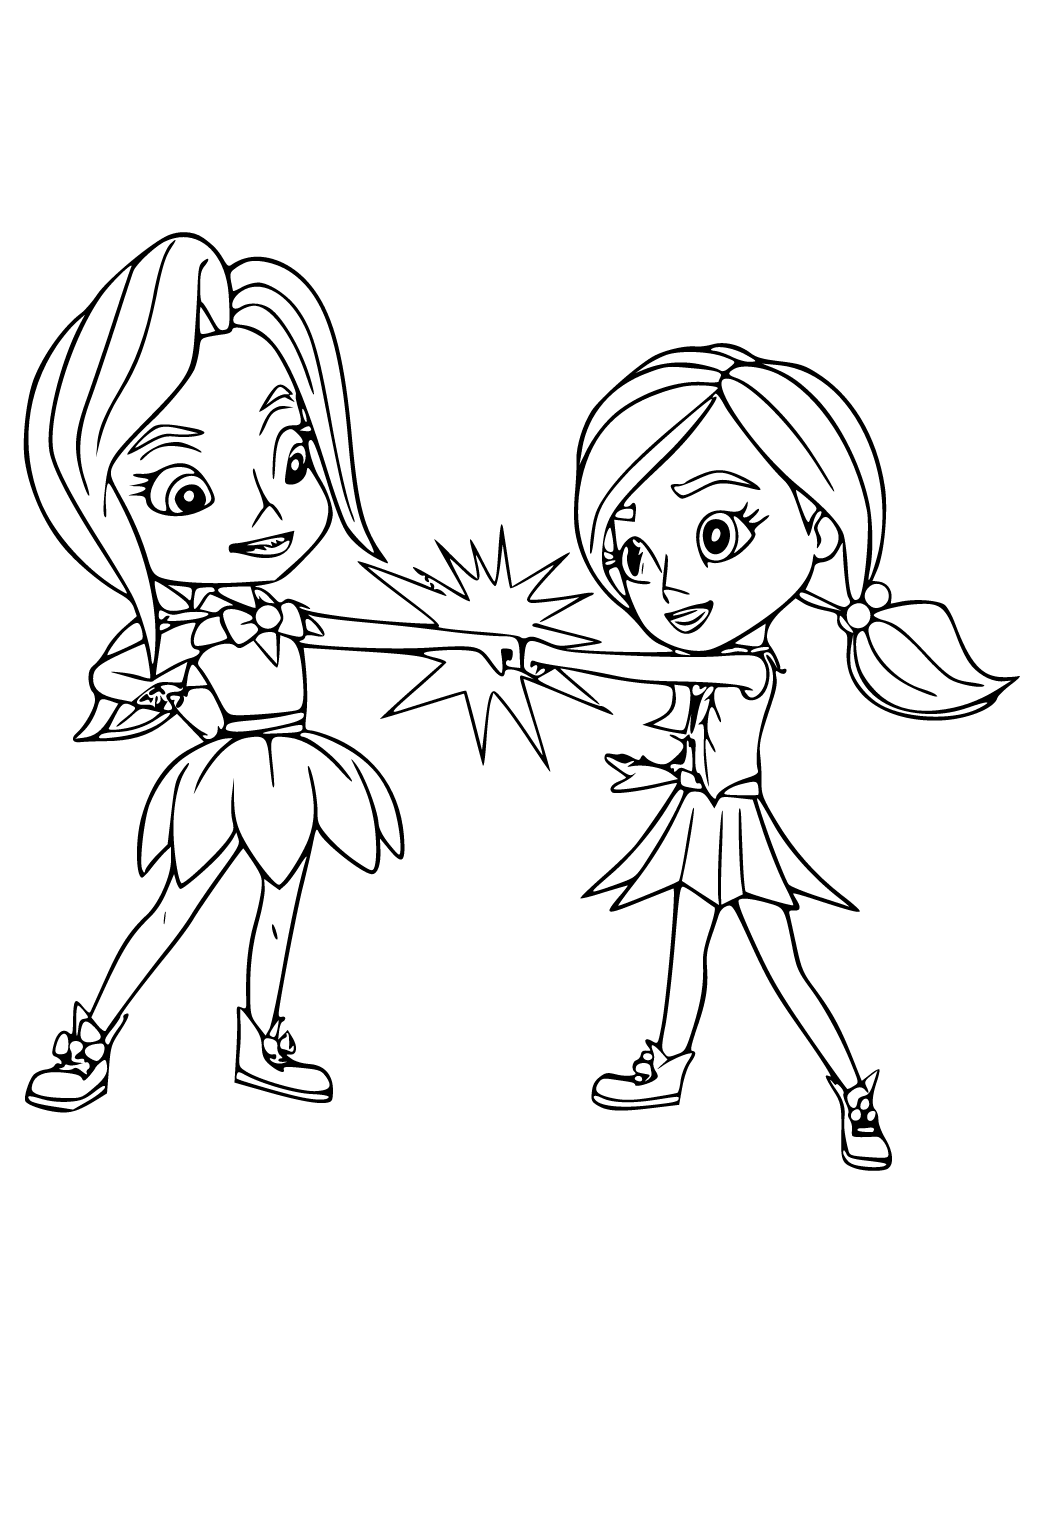 Pin by Виктория on Раскраска  Bff drawings, Cute coloring pages, Coloring  pages inspirational